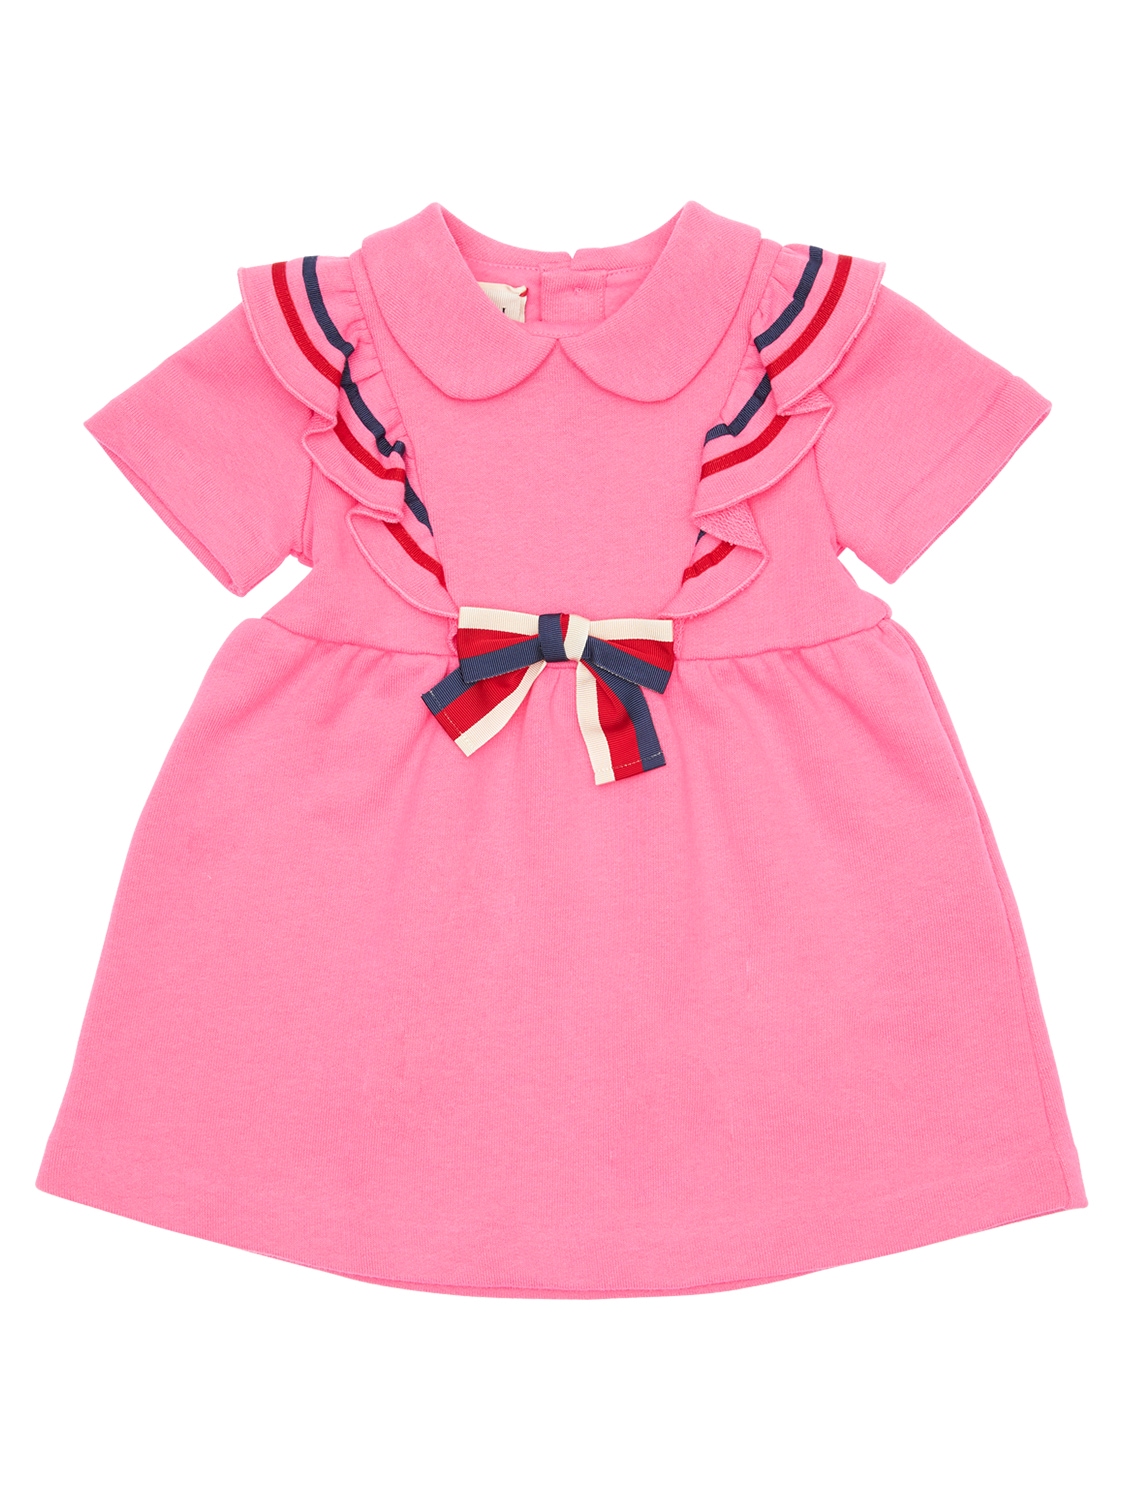 Gucci Kids' Cotton Jersey Dress W/ Bow Appliqué In Pink